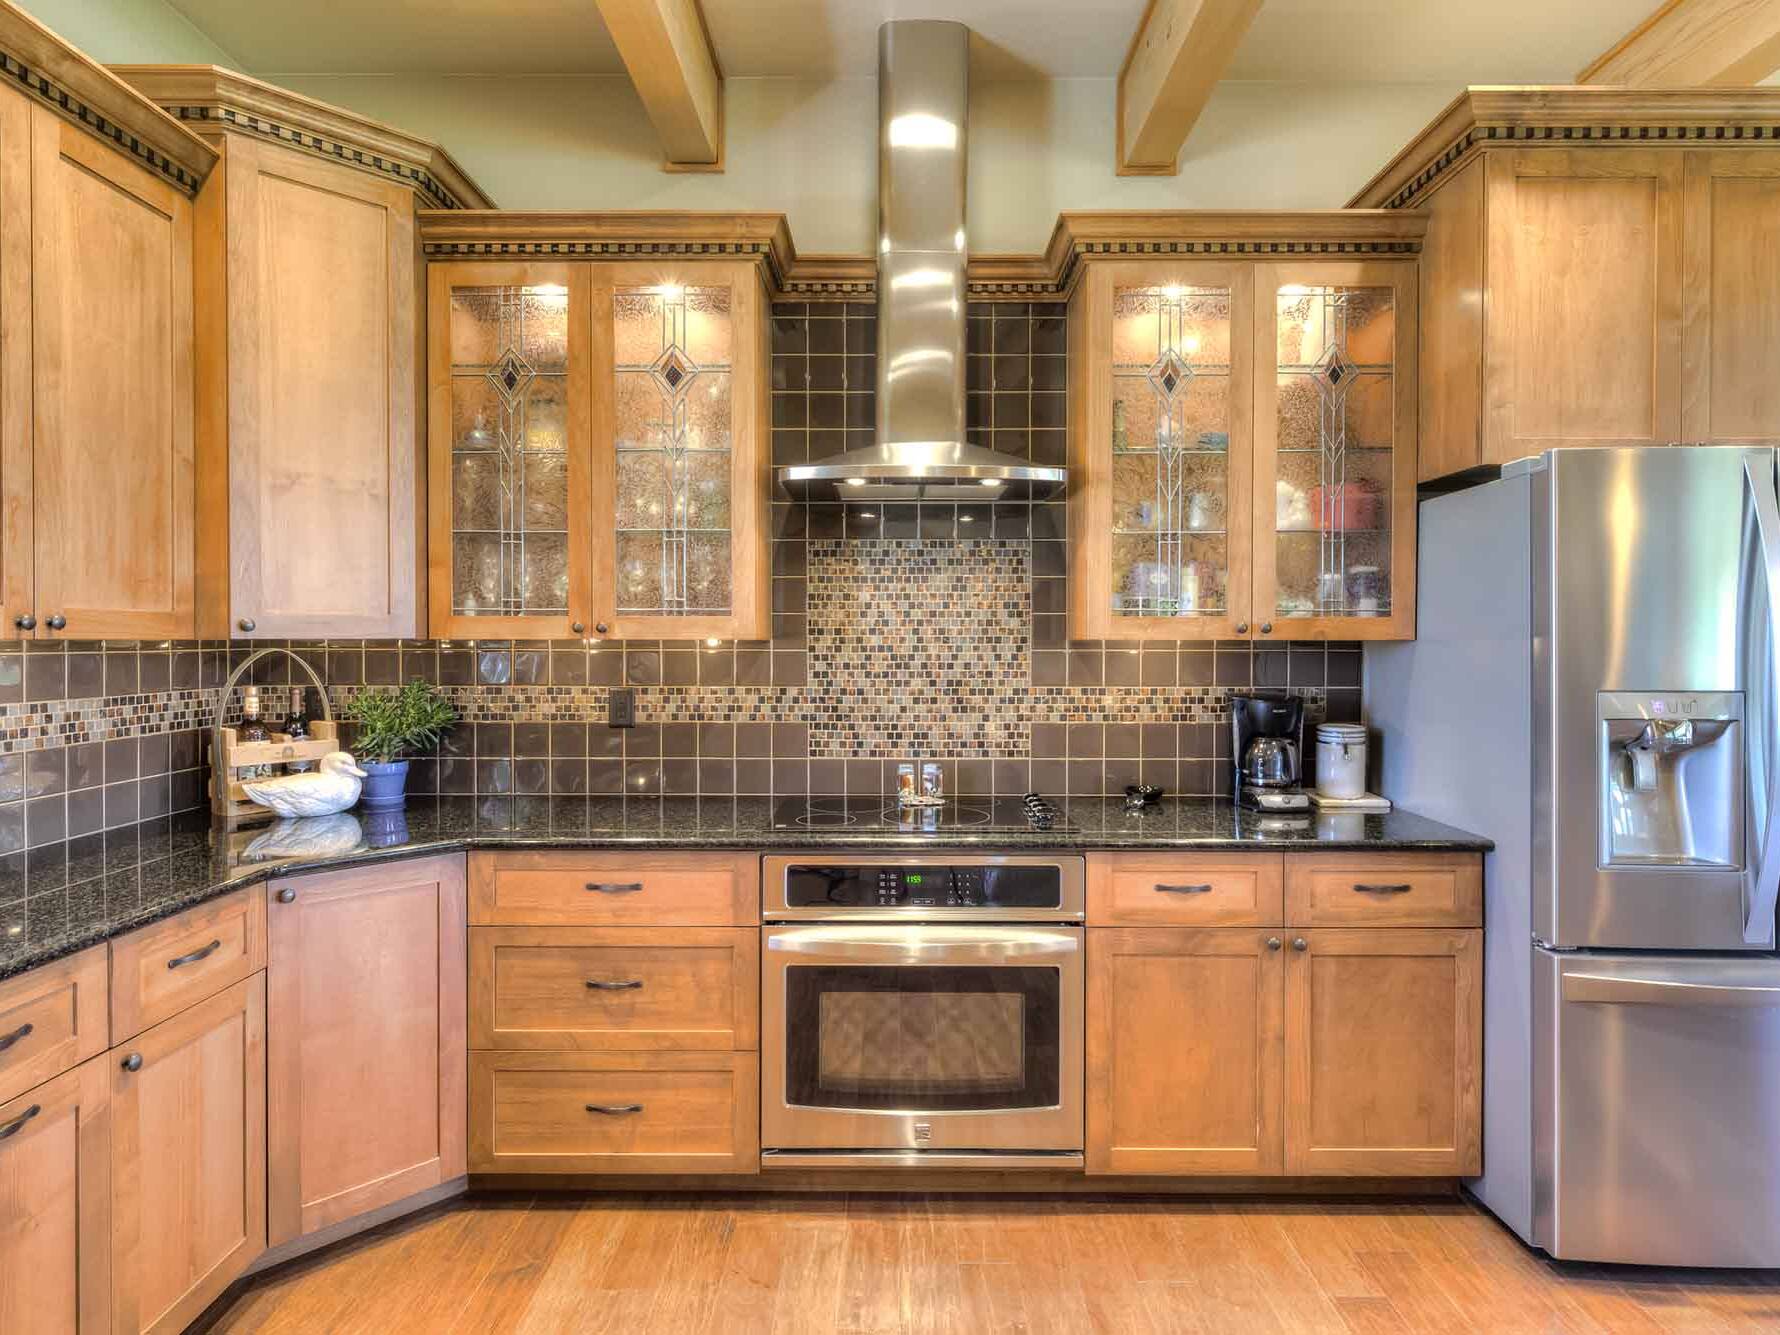 Kitchen with granite countertops, tile backsplash, and custom glass in the cabinet doors in a custom home built by Big Sky Builders in Hamilton Montana